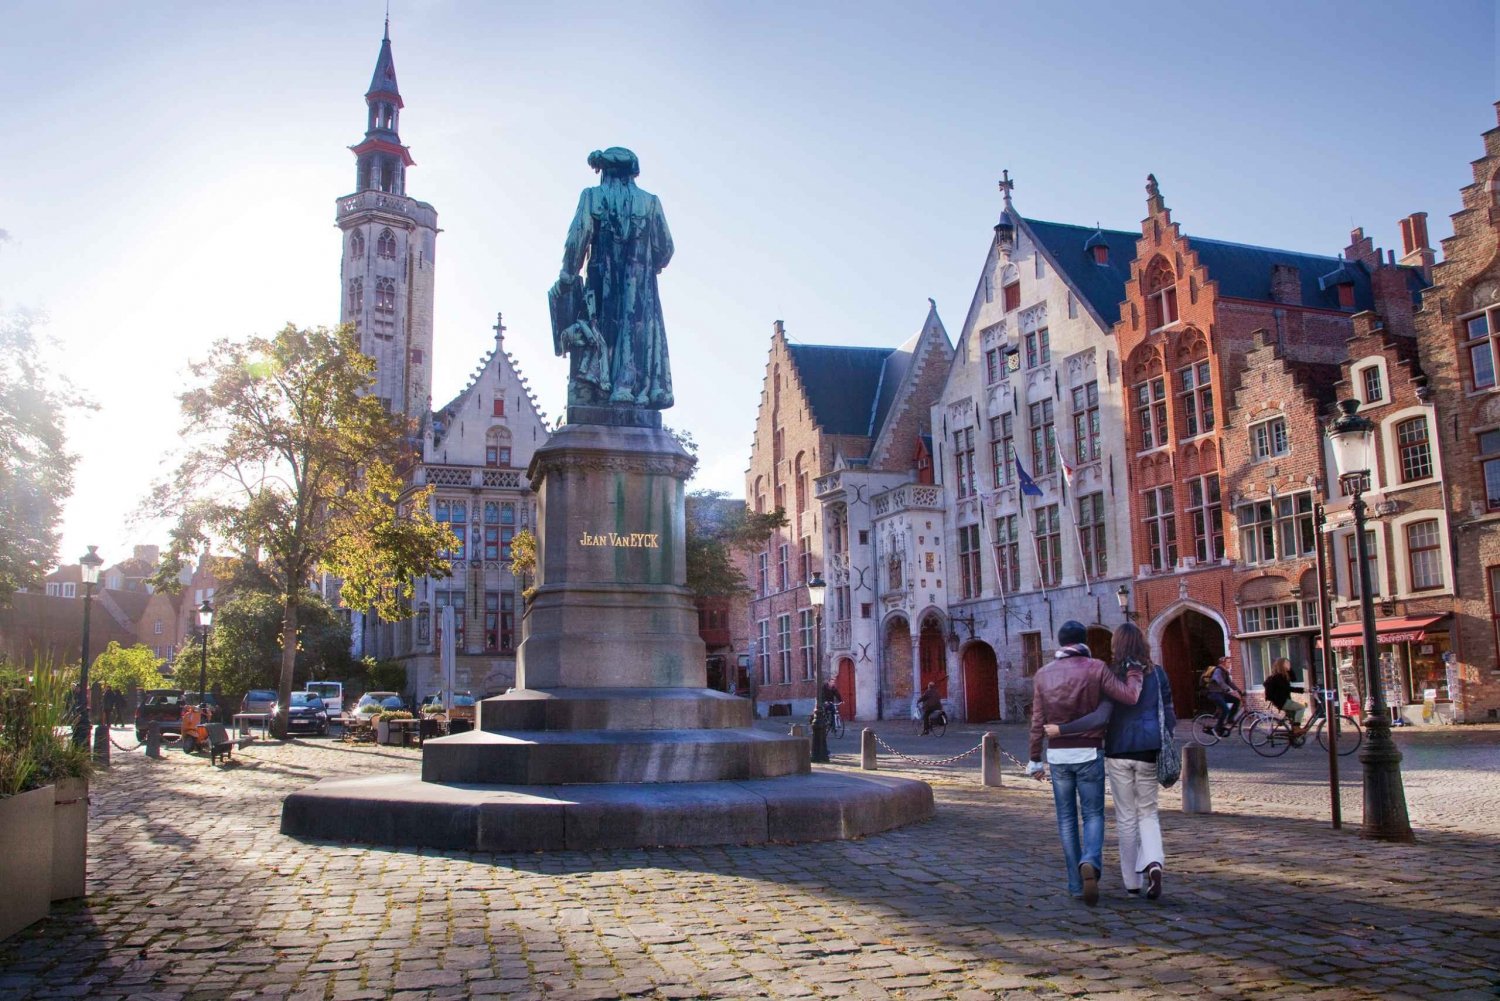 From Brussels: Bruges & Ghent Full-Day Trip